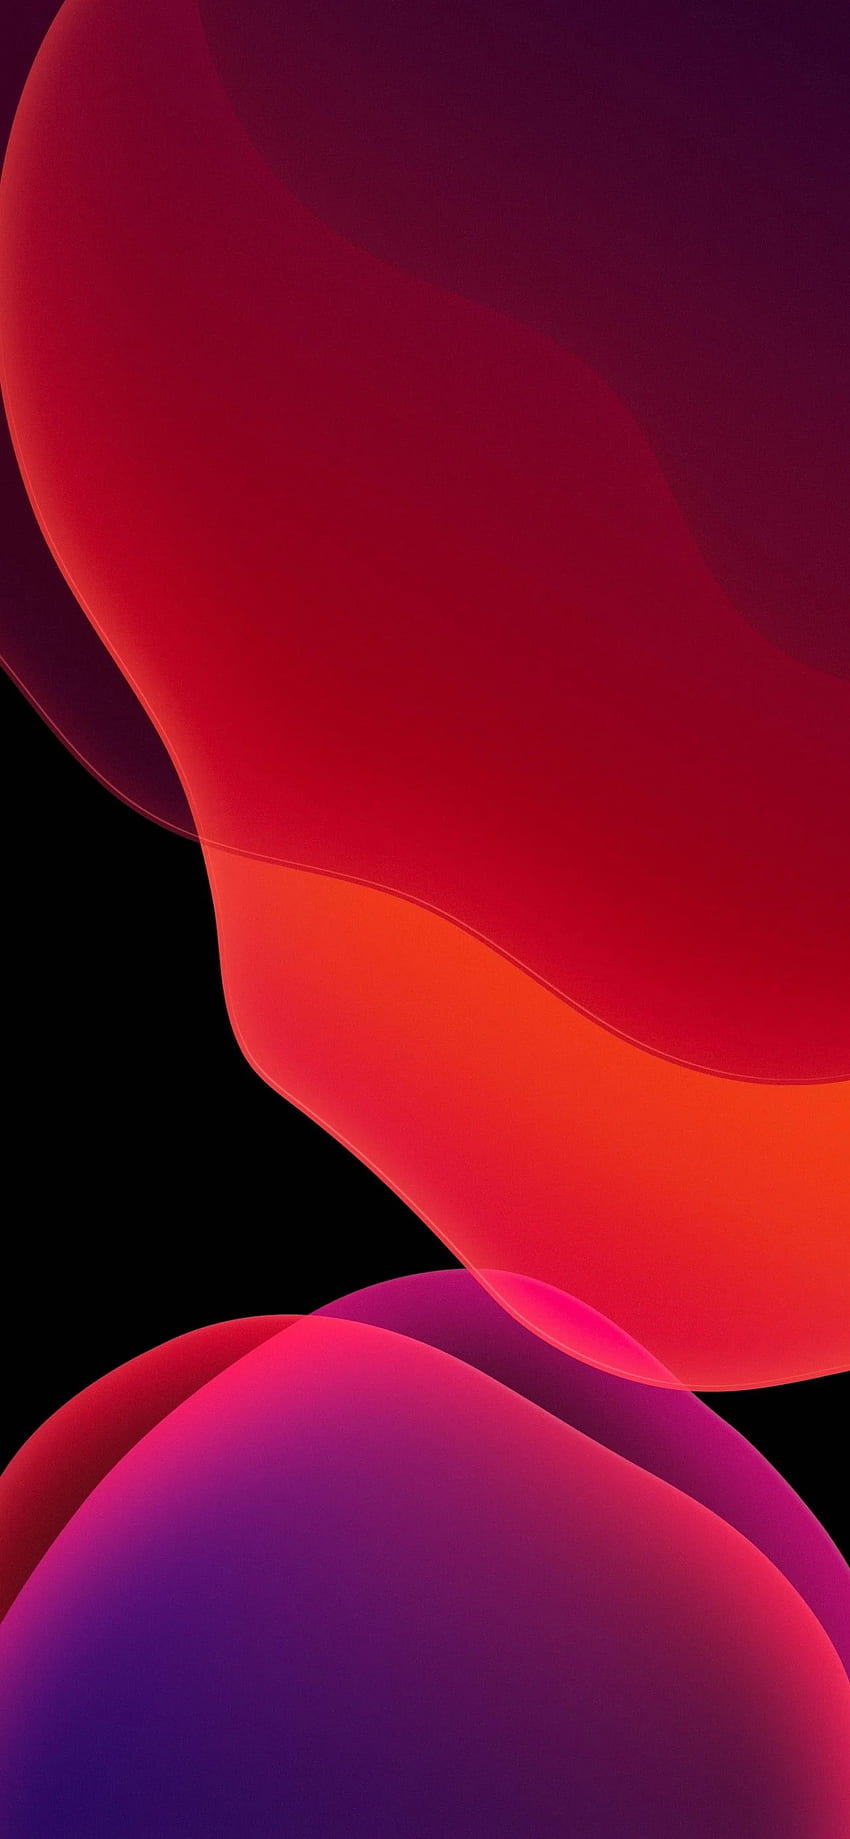 Ios 8 Wallpaper for iPhone 12 Pro